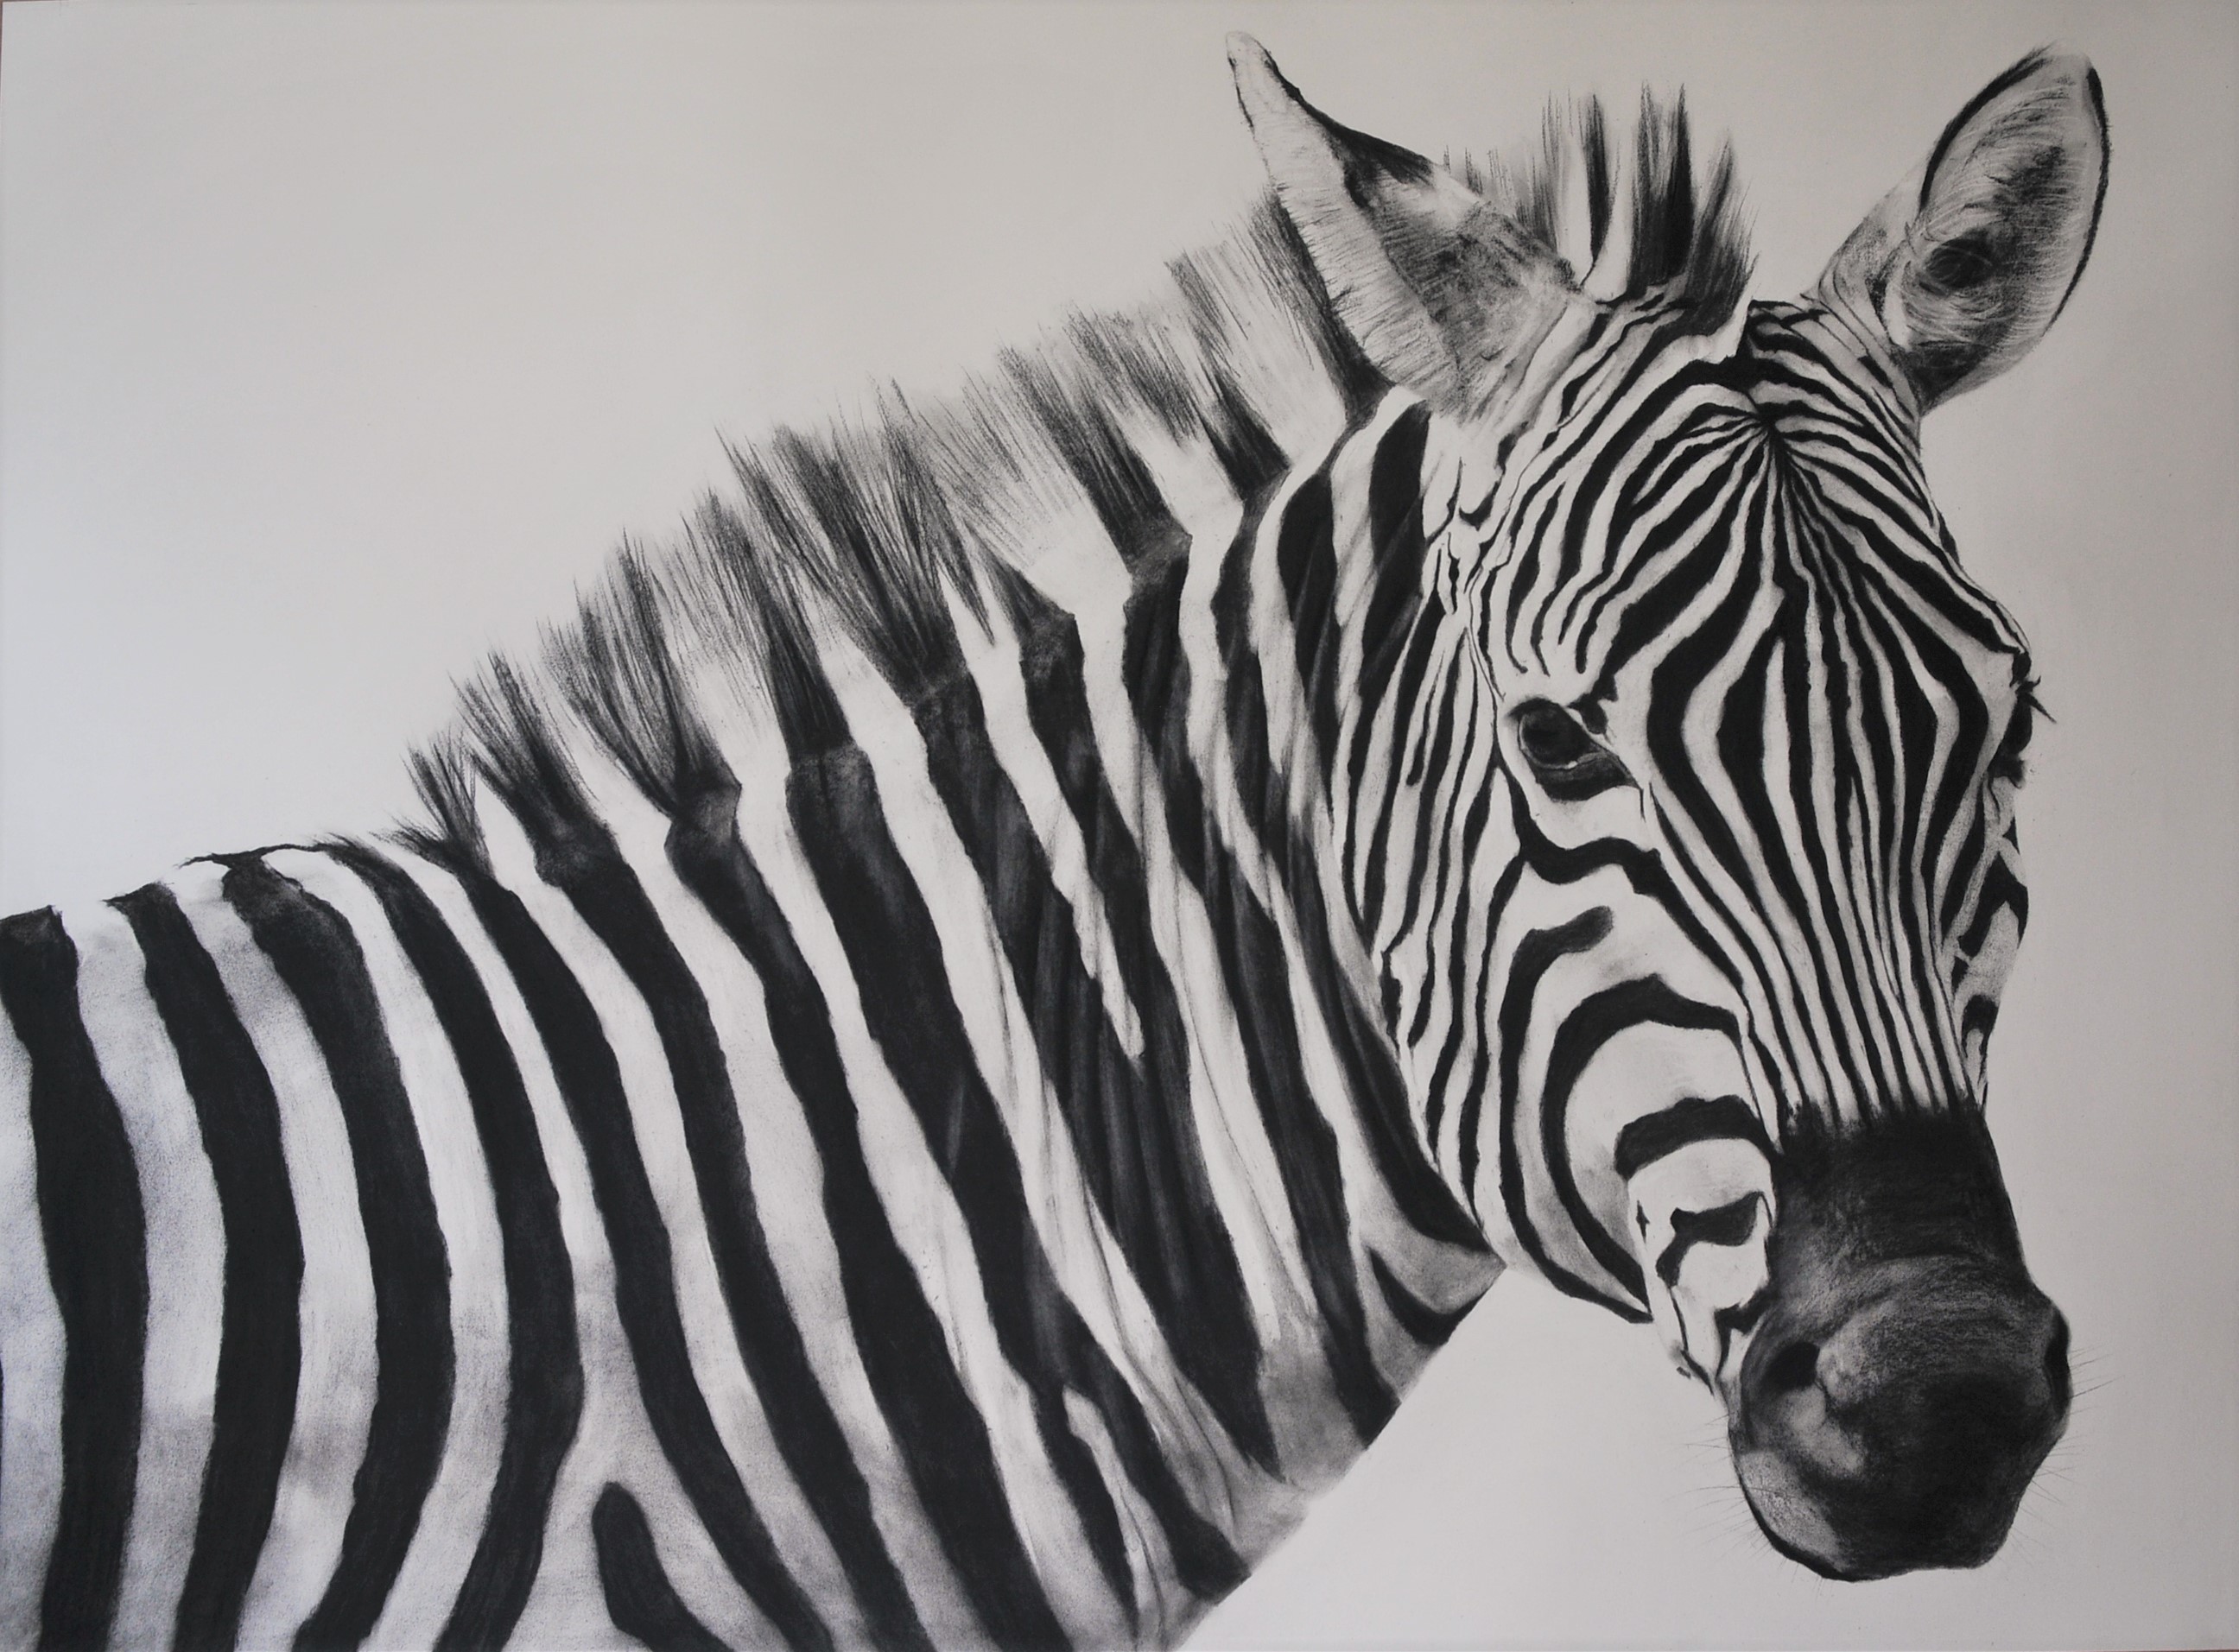 Charcoal drawing of a zebra